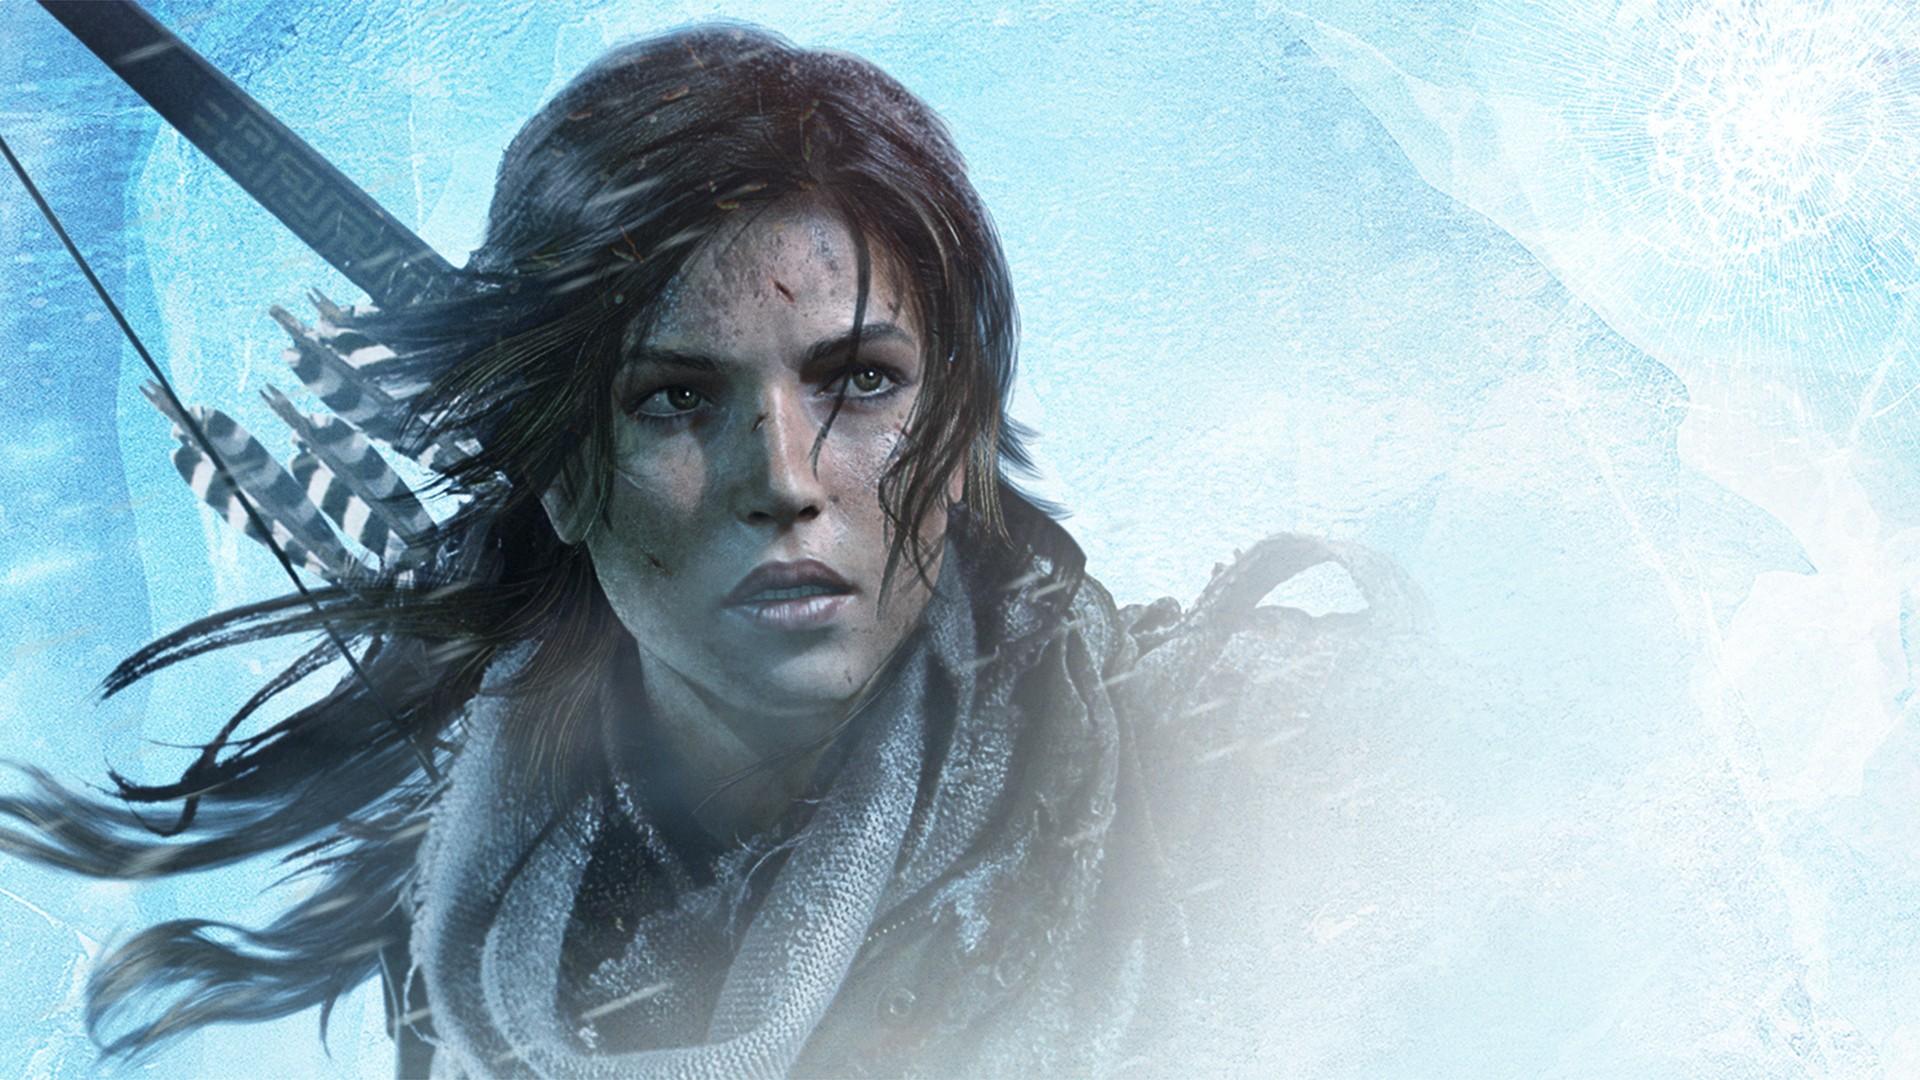 Rise of the Tomb Raider PS4 Wallpaper